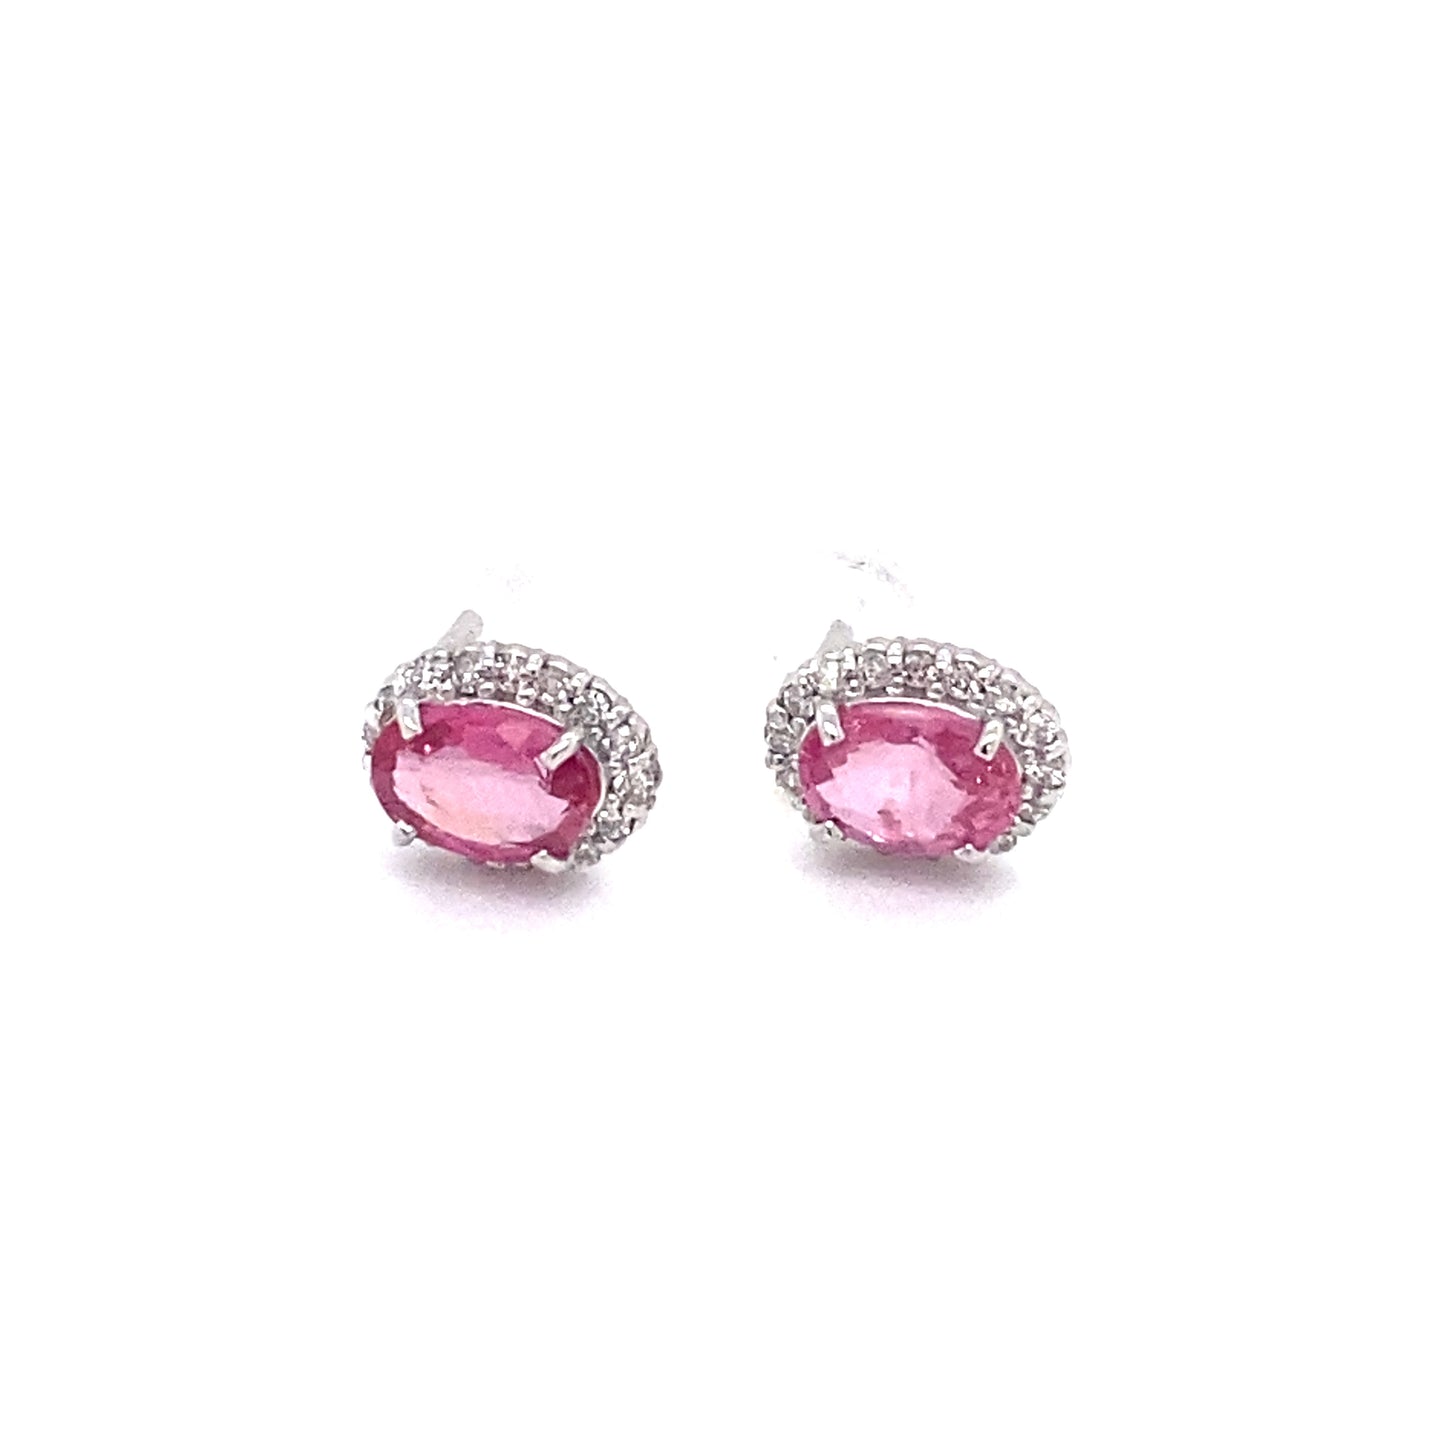 Circa 1990s 1.18ctw Pink Sapphire and Diamond Halo Earrings in 18K White Gold